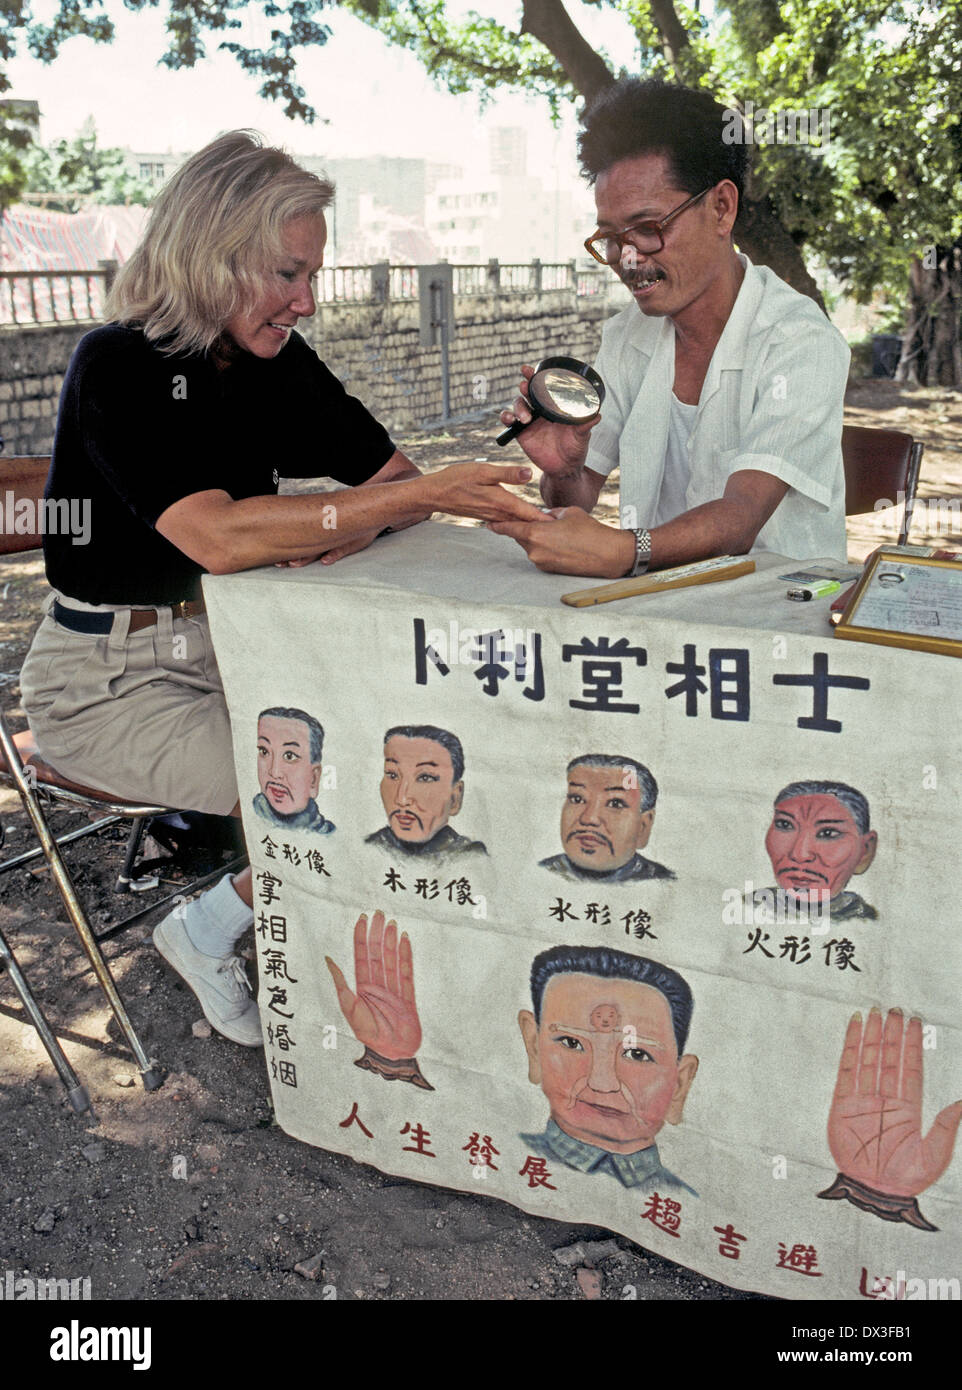 Outdoors under the shade of trees, a Chinese palm reader studies the hand of an American woman who is touring Macau in the People's Republic of China. Stock Photo